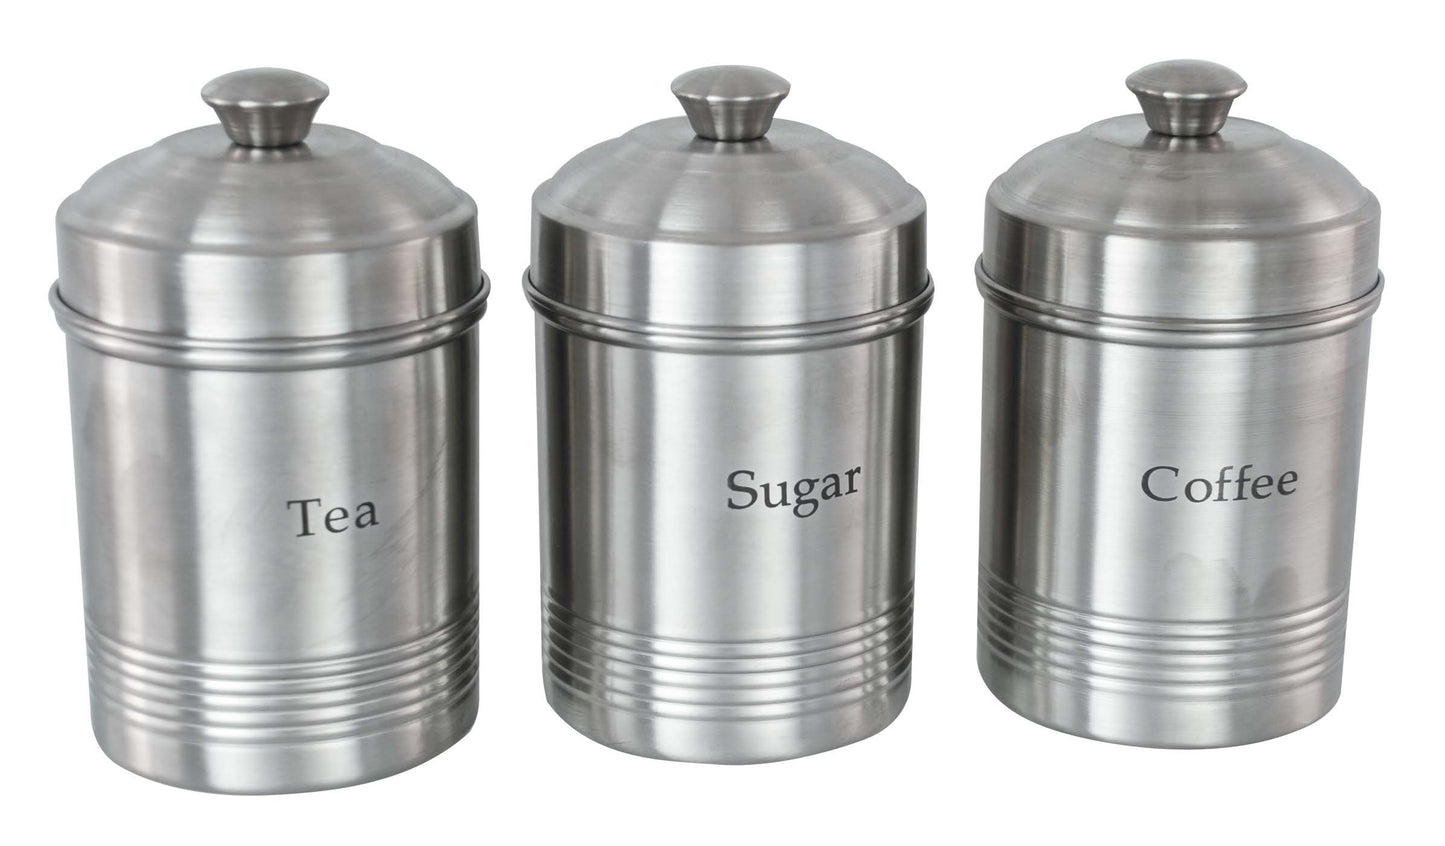 Buckingham Stainless Steel Set of 3 Storage Canisters Tea Coffee and Sugar, Ribbed, Matt Finish